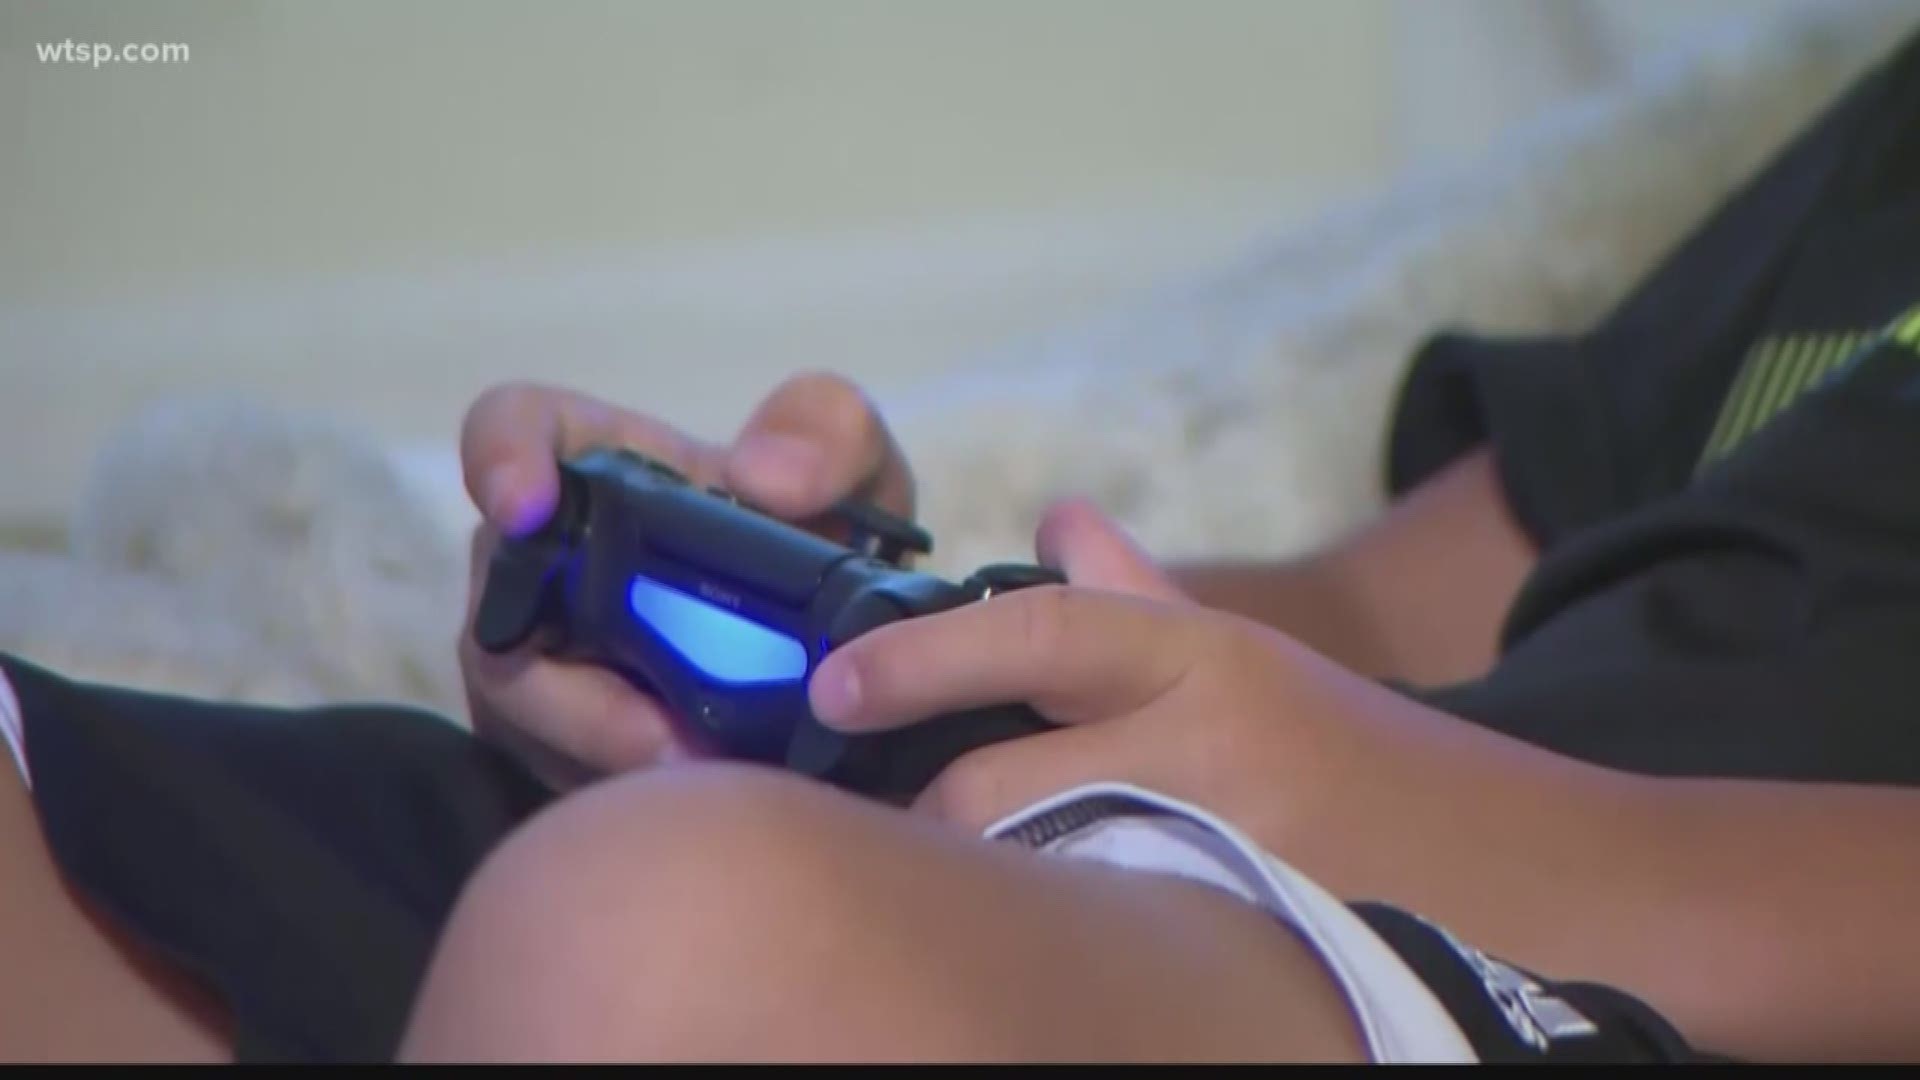 Parents have been saying it for years and now, health officials have made it official: video game addiction is real. Over the weekend, the World Health Organization voted to adopt its latest version of the International Statistical Classification of Diseases and included for the first time is what the organization is calling "gaming disorder."